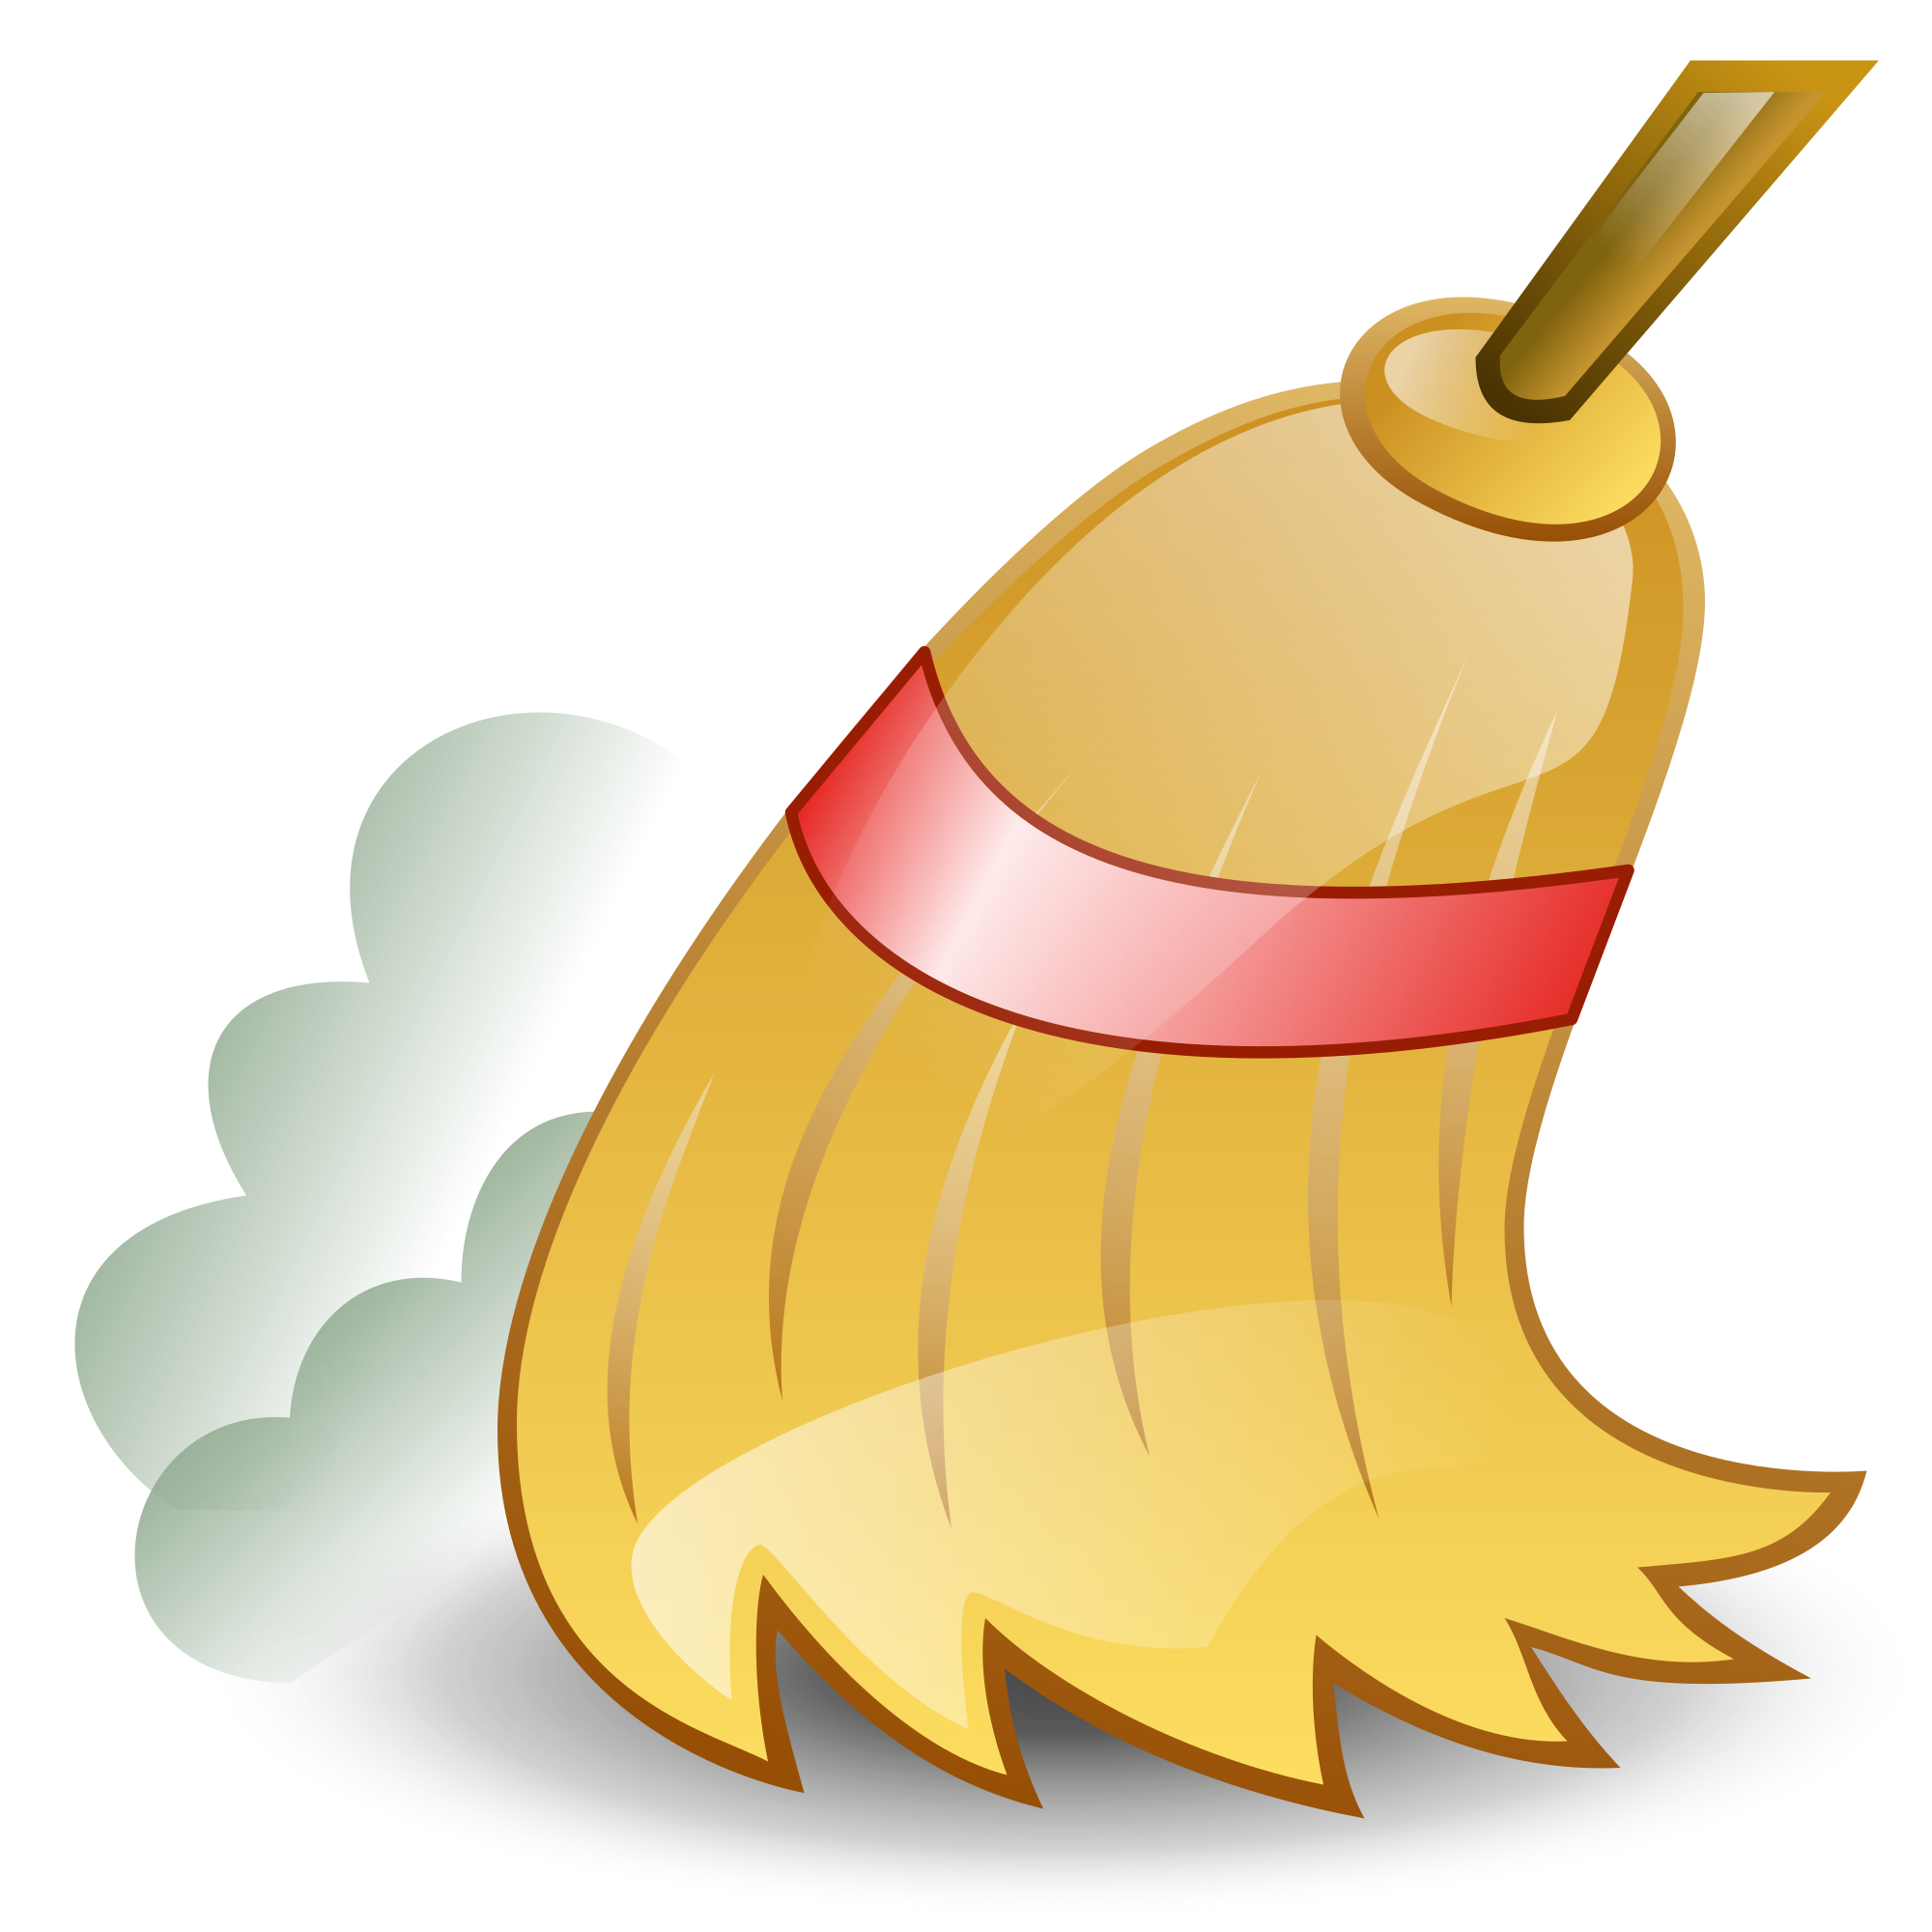 Png image purepng free. Clean clipart broom